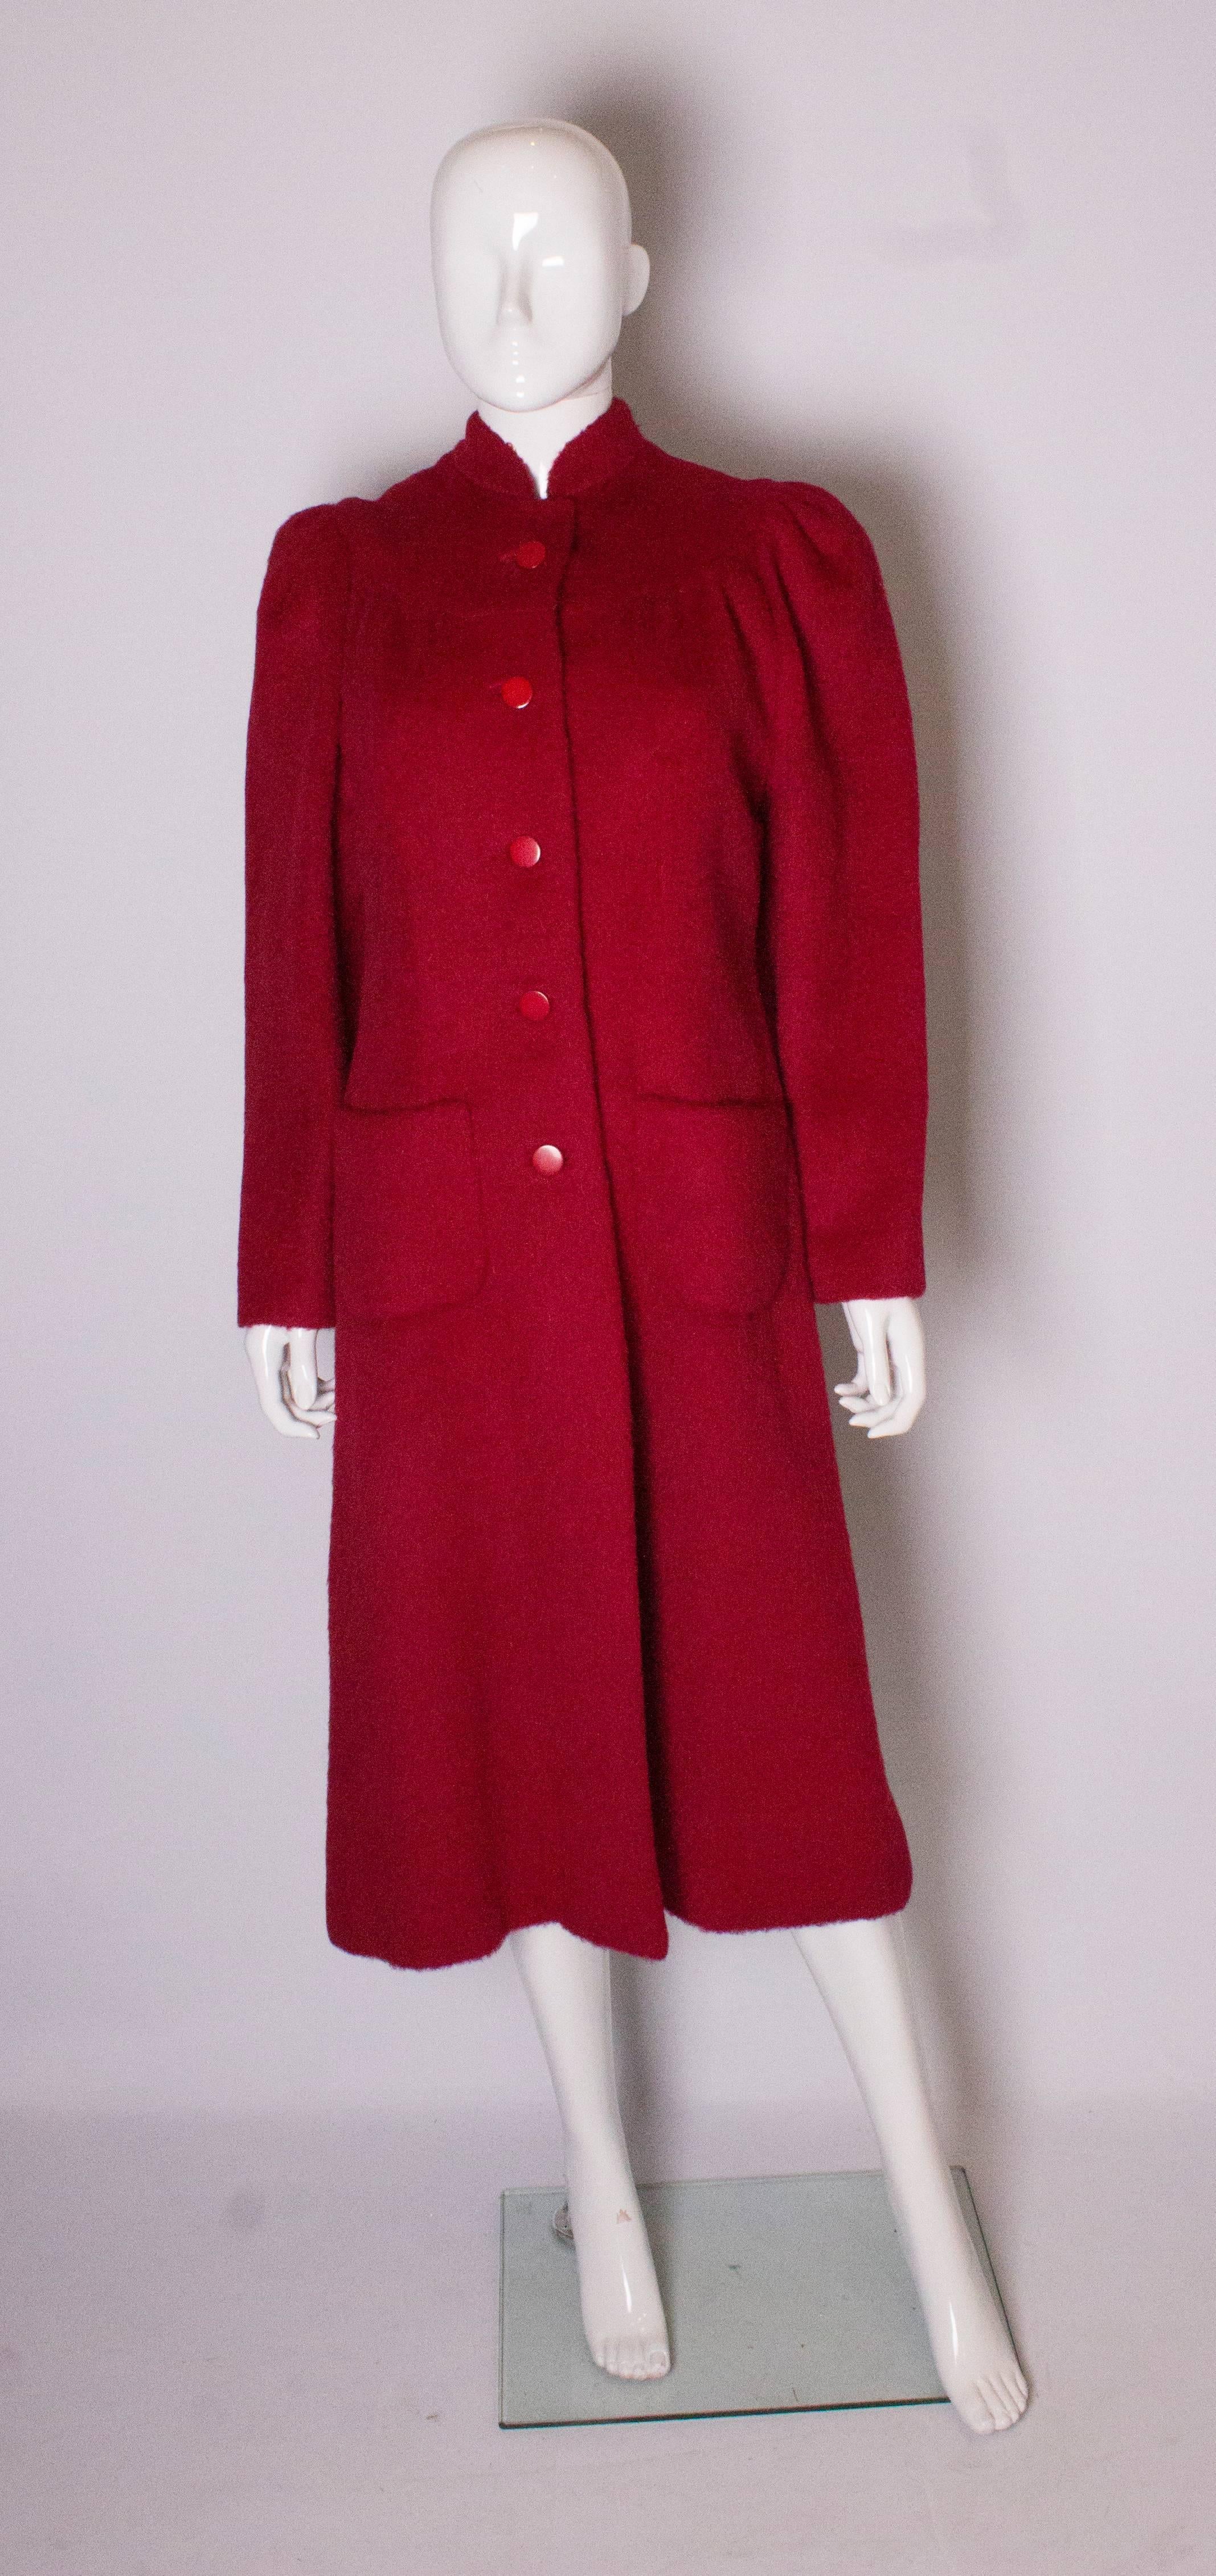 A warm and elegant  vintage  coat by Donald Campbell. The coat has a stand up collar, yoke, 5 button opening  at the front and two pockets. It is fully lined.